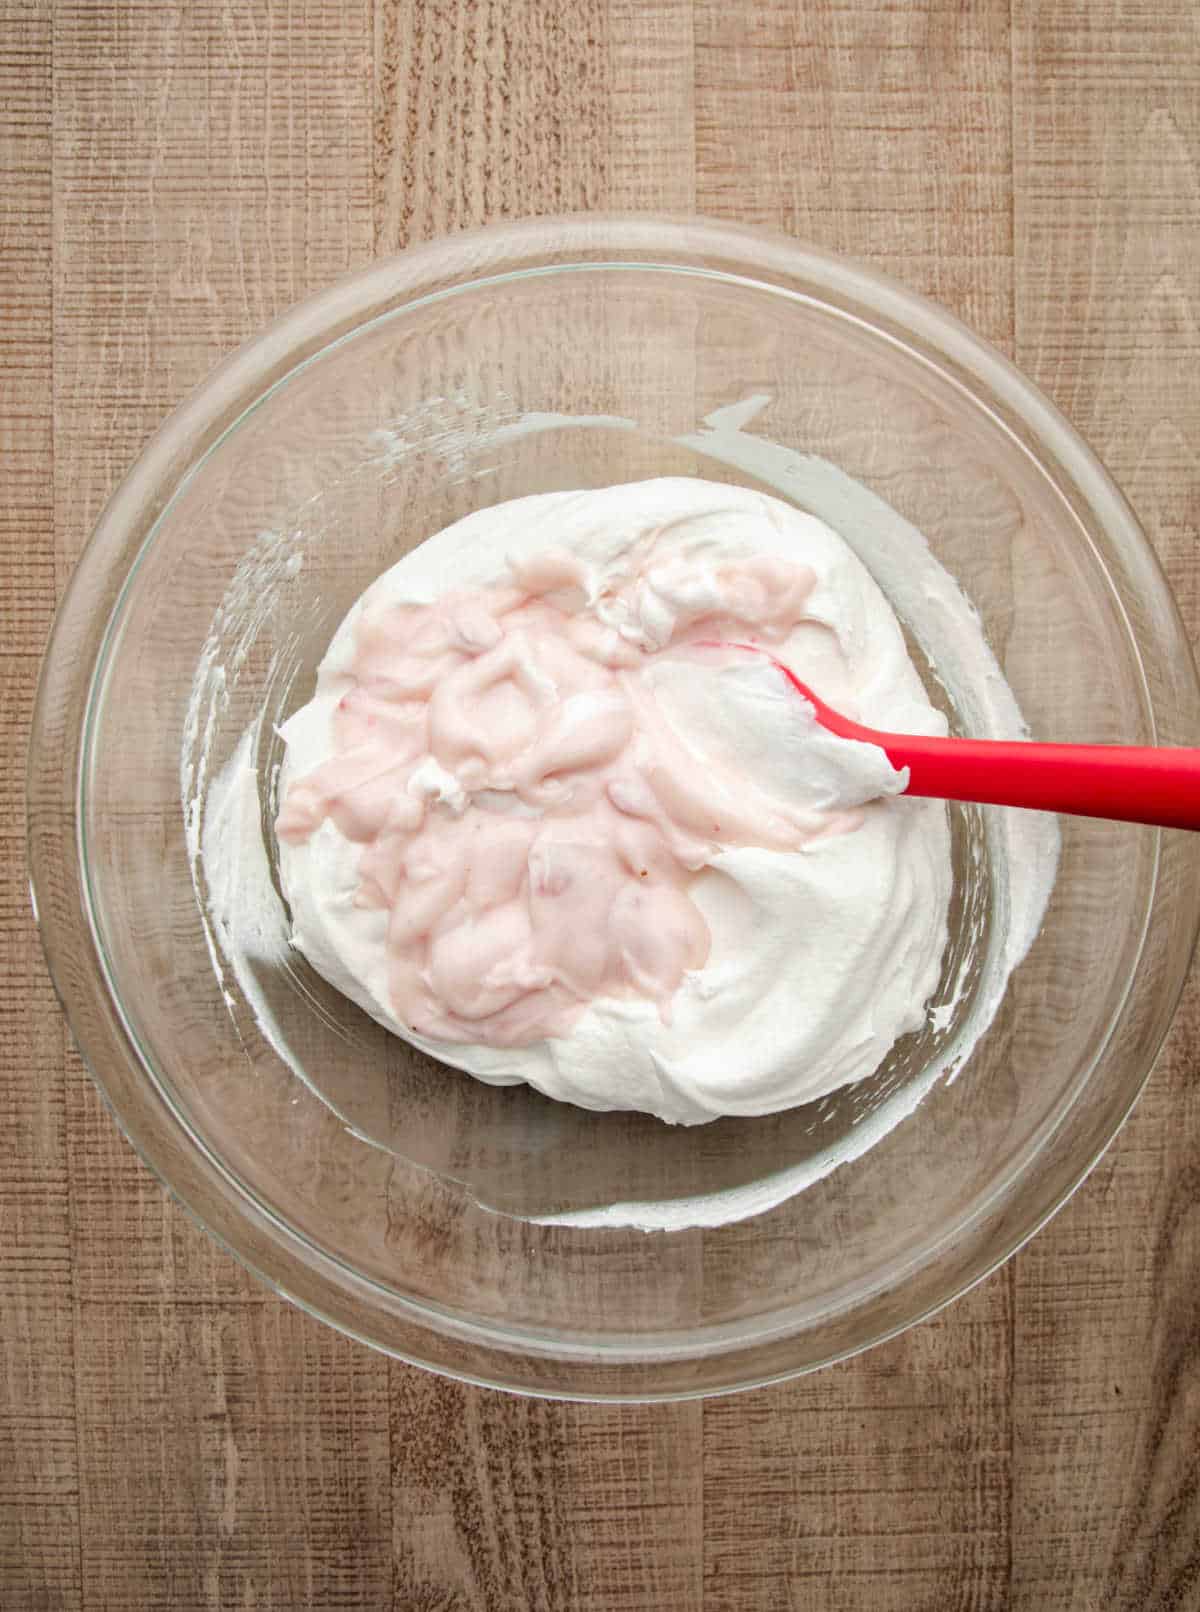 Strawberry yogurt and cool whip in a glass mixing bowl. 